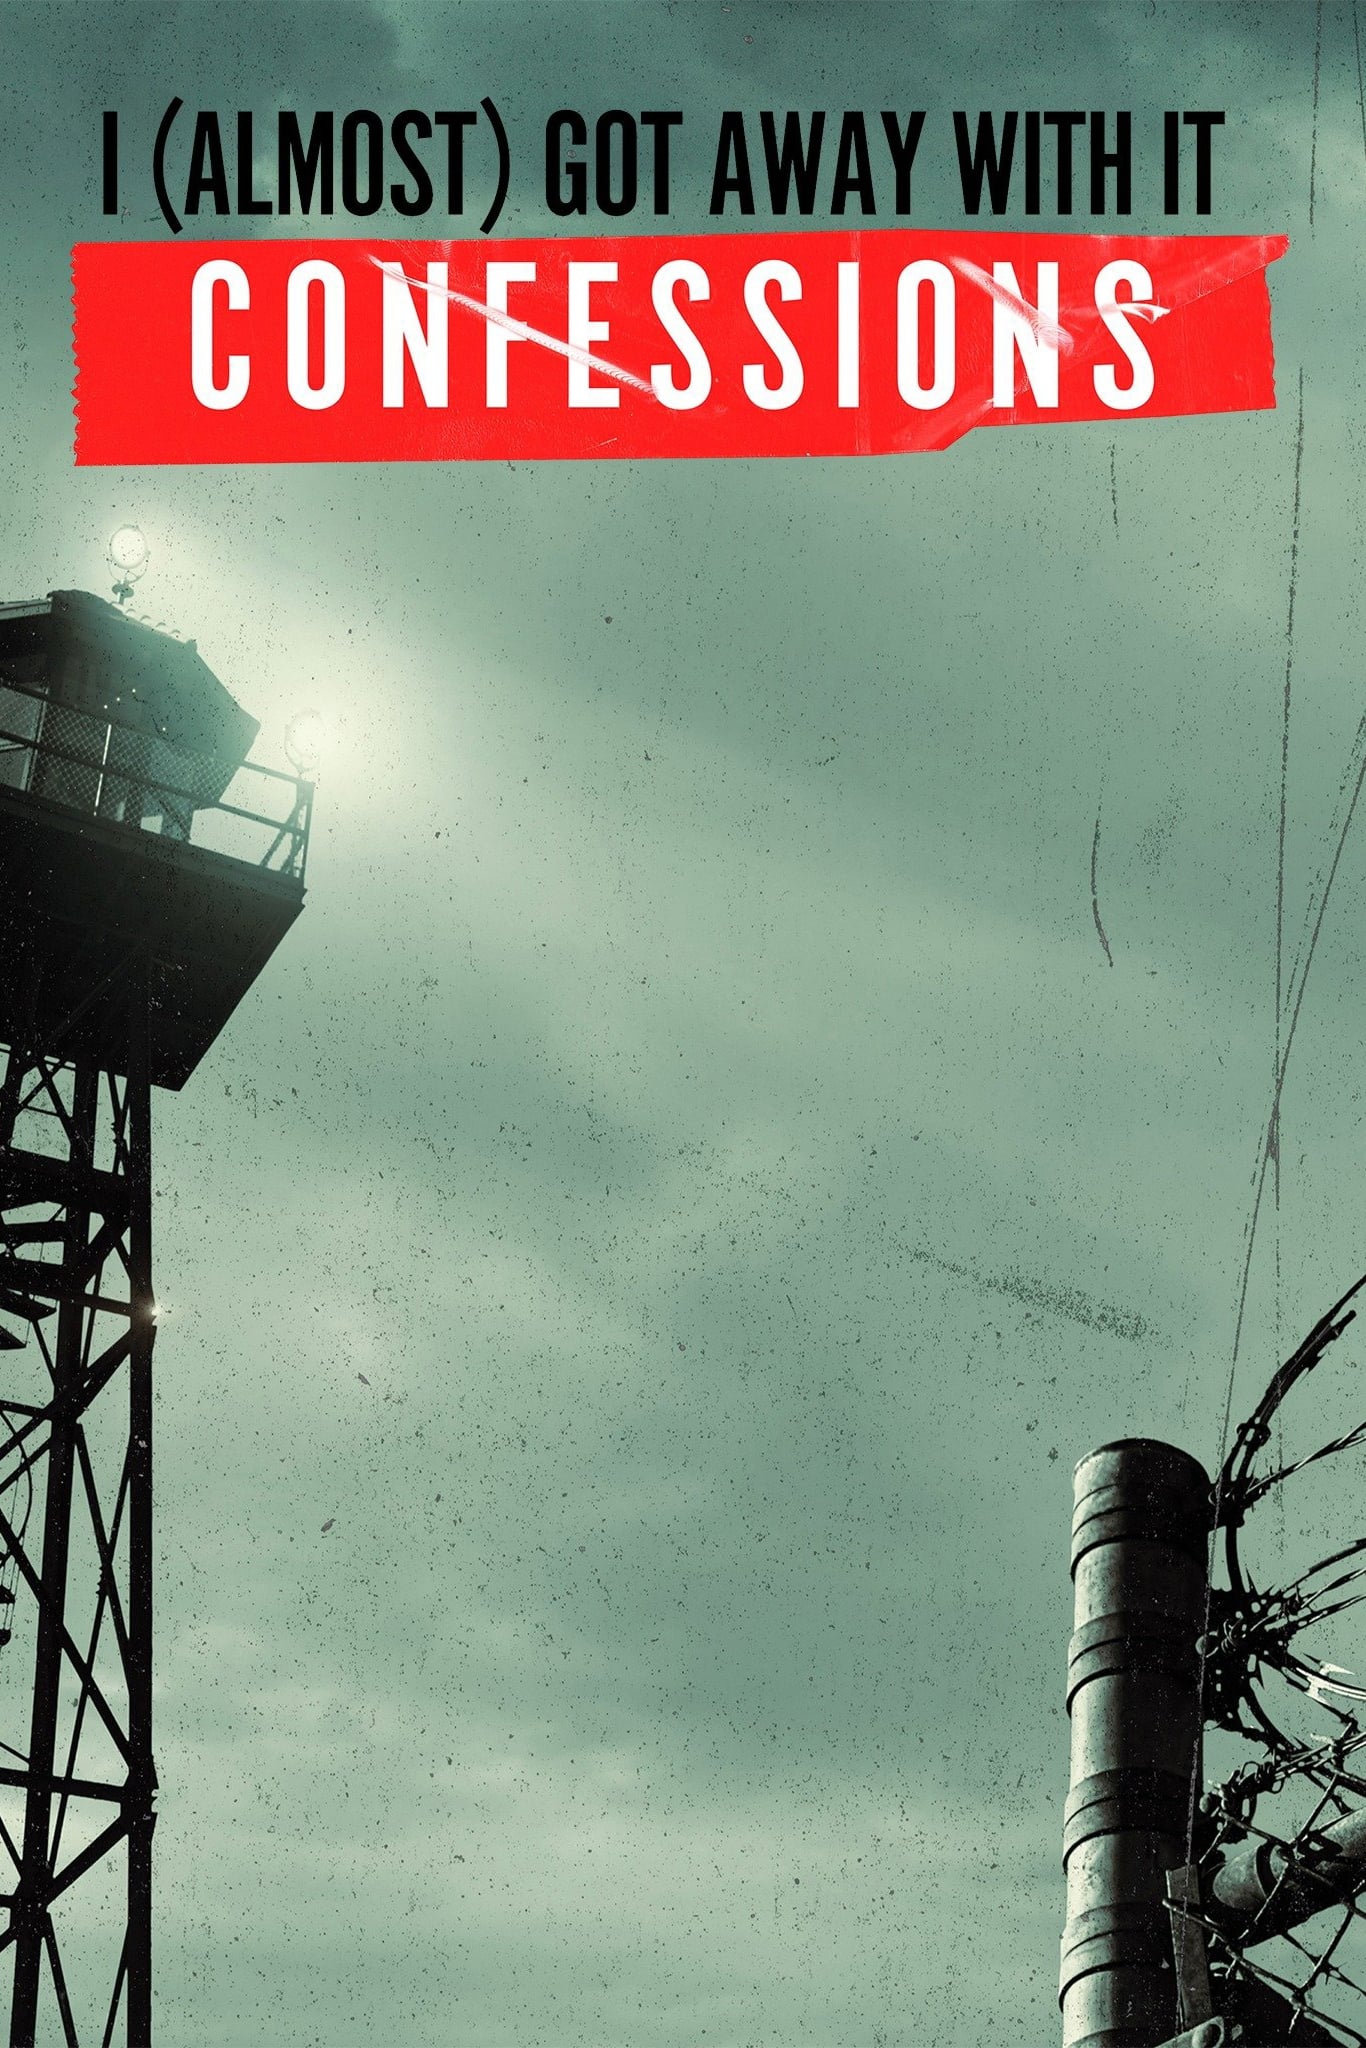 I (Almost) Got Away With It: Confessions